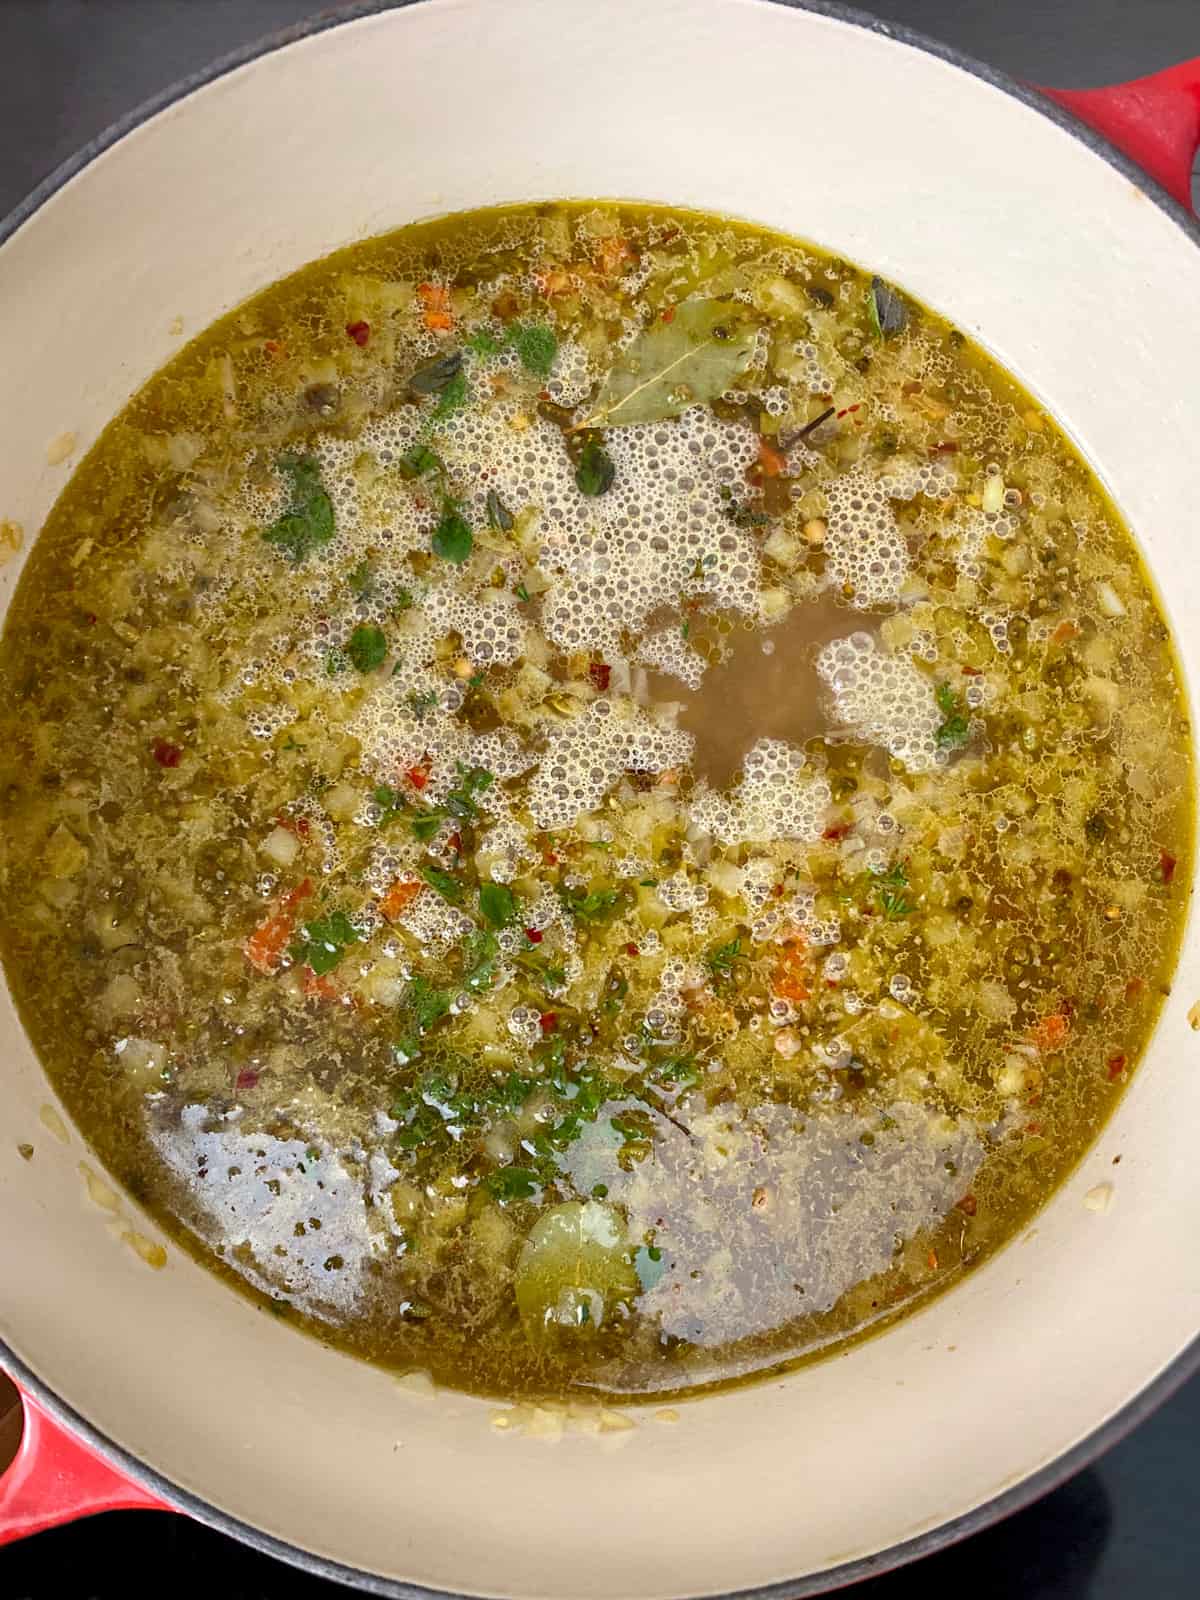 Lentils, vegetables and broth in a stockpot.